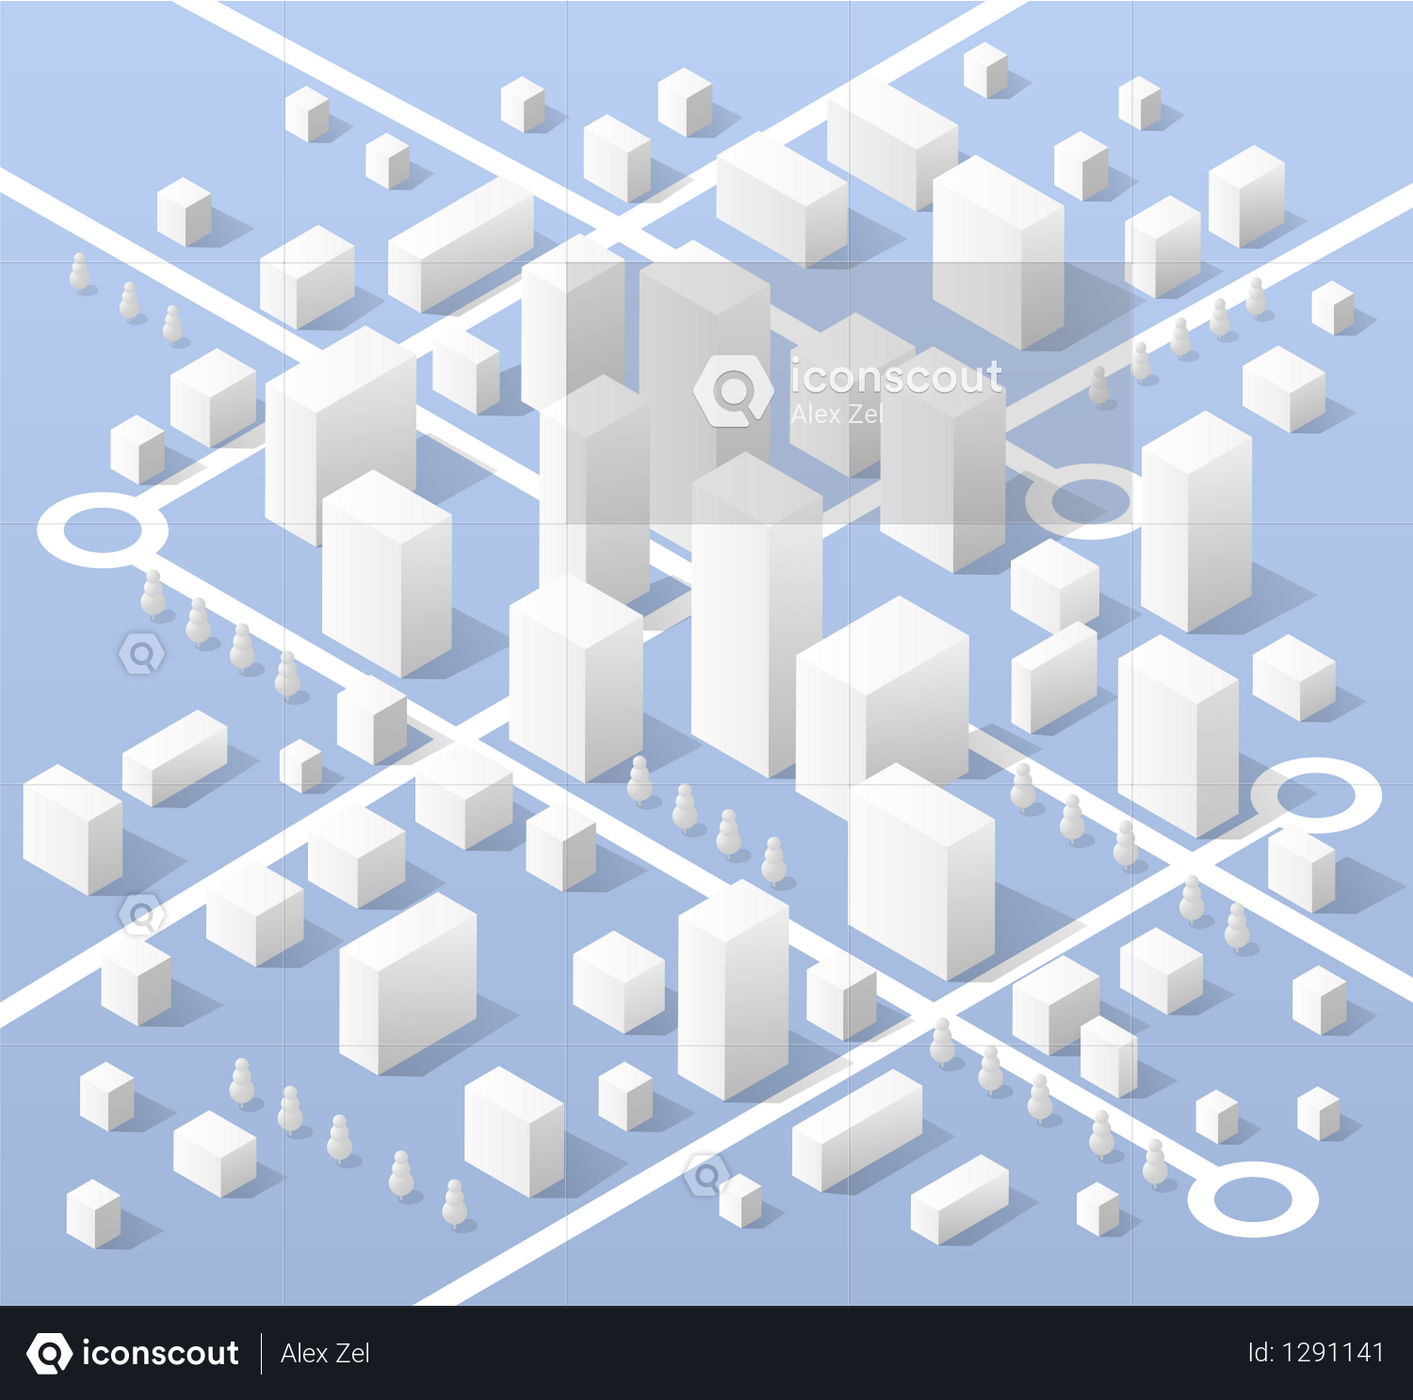 Best Premium City isometric map Illustration download in PNG & Vector